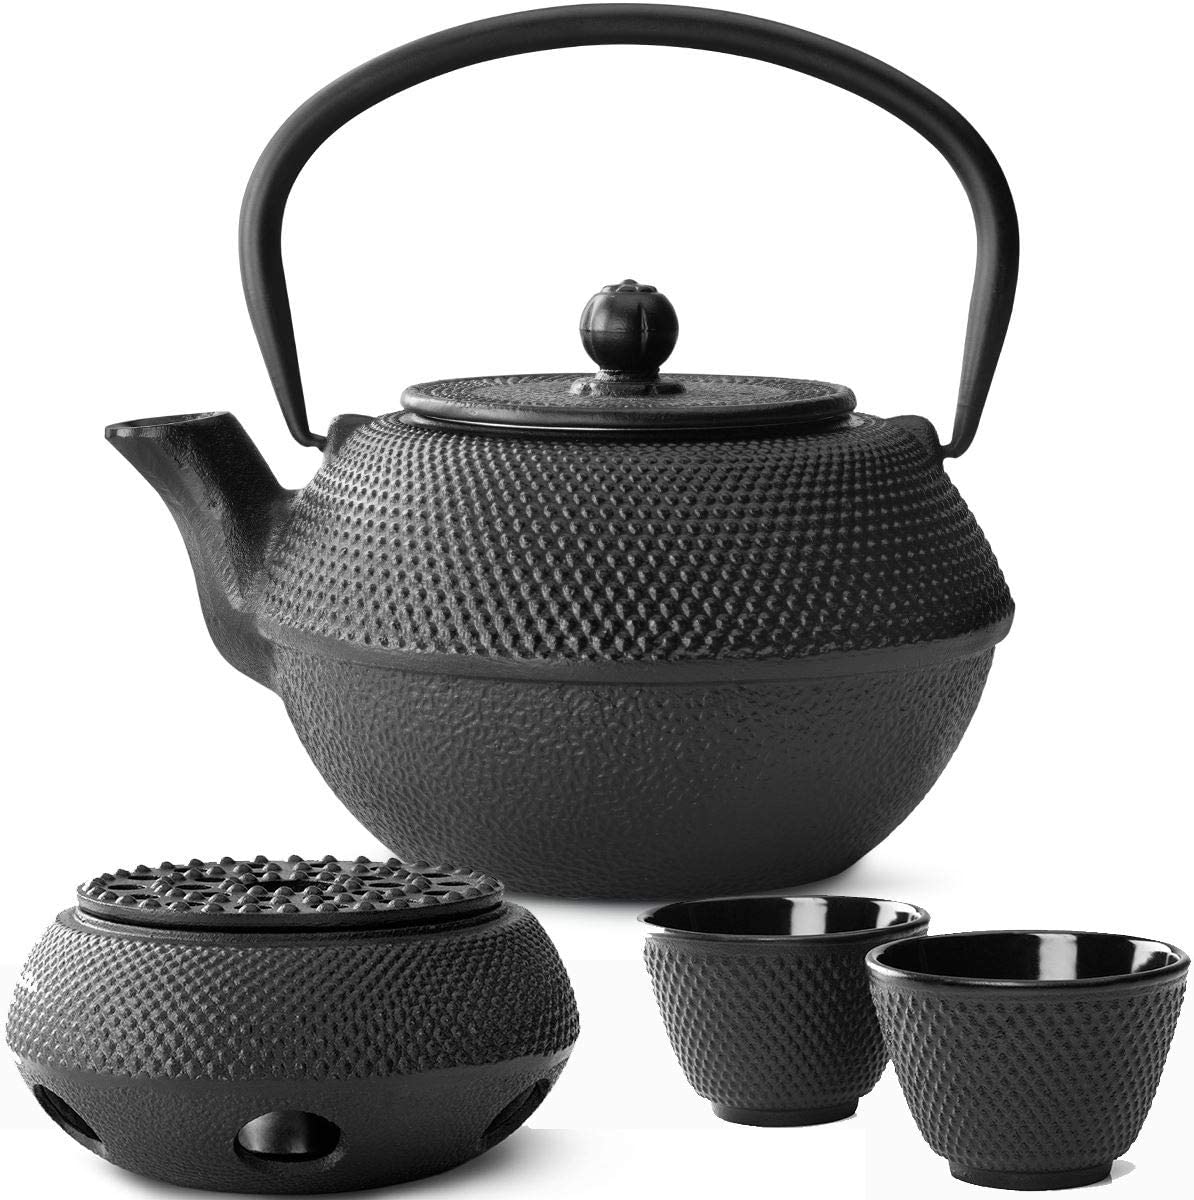 Bredemeijer Teapot Asian Cast Iron Set Black 1.1 Litres with Tea Filter Strainer with Warmer and Tea Cup (2 Cups) Black